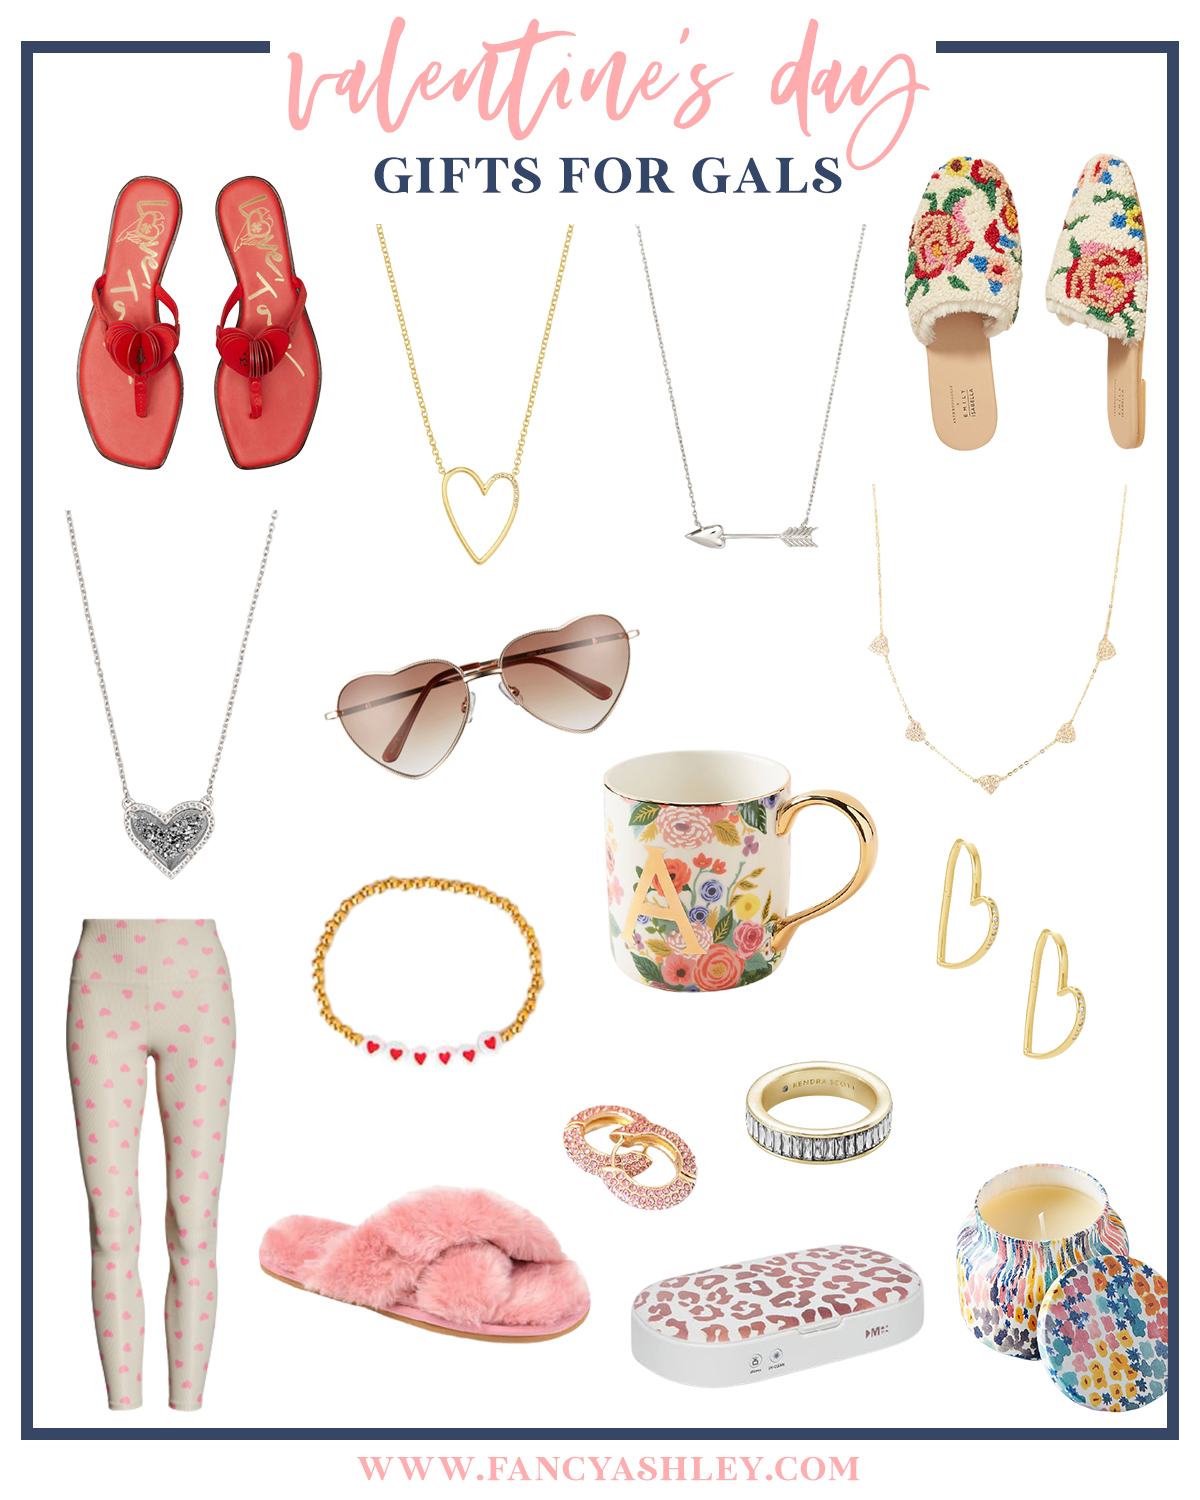 Valentine's Day Gift Ideas by popular Houston life and style blog, Fancy Ashley: collage image of red flip flop sandals, heart frame sunglasses, monogram floral print mug, heart hoop earrings, gold and heart bead bracelet, cz ring, pink fuzzy slippers, heart pendant necklace, arrow necklace, gold heart necklace, pink cz hoop earrings, candle, floral print mules, heart print leggings, and uv light sanitzer. 